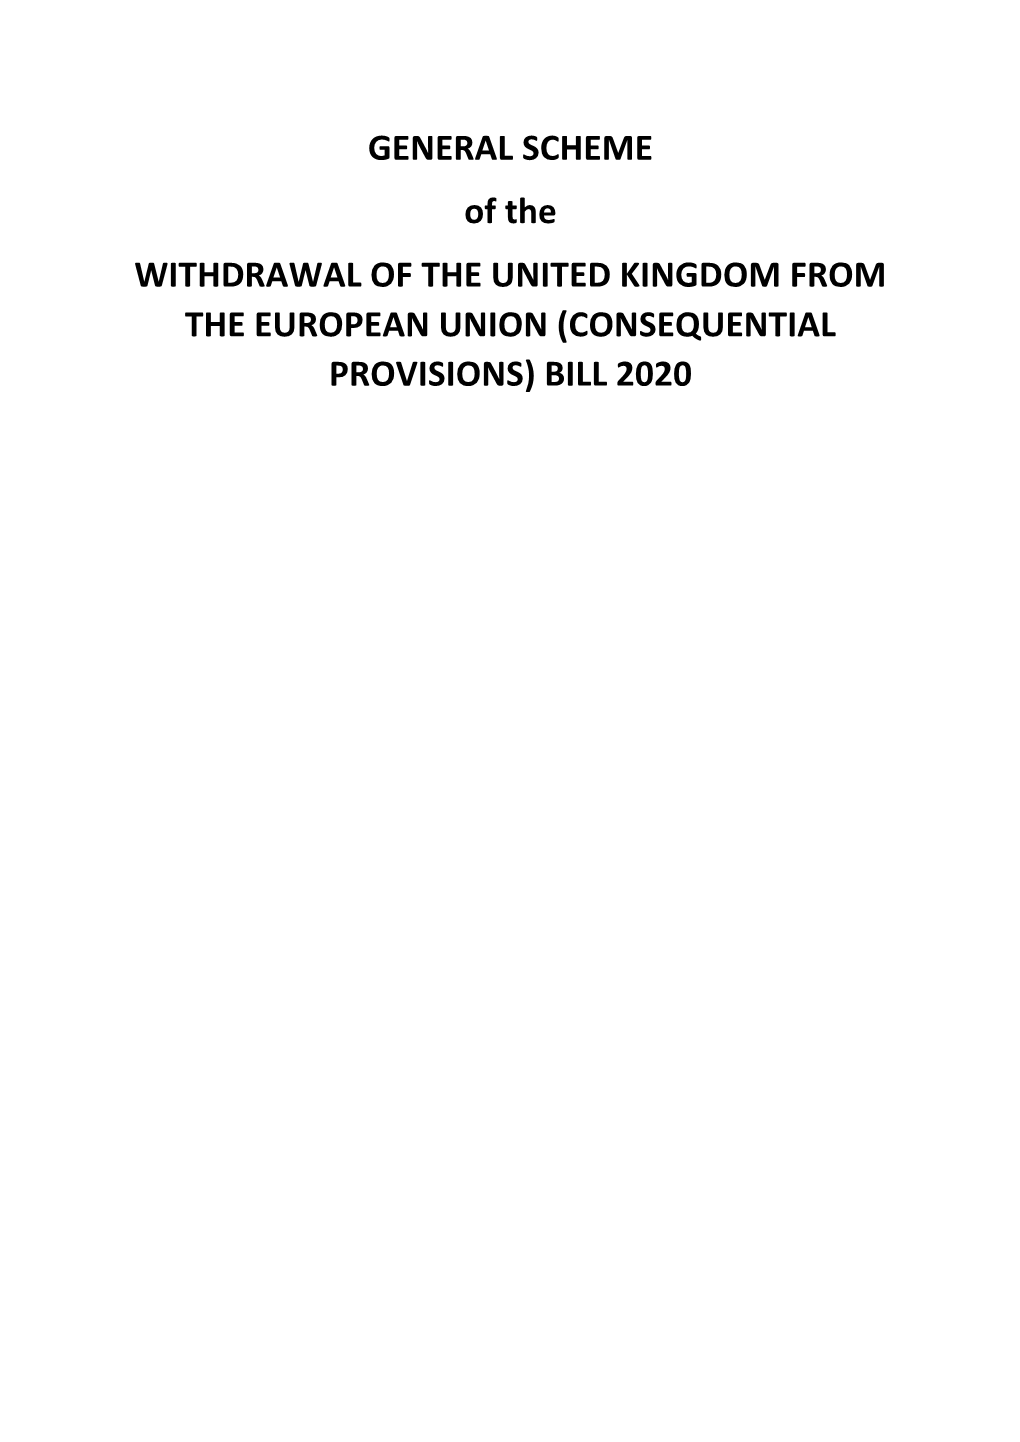 GENERAL SCHEME of the WITHDRAWAL of the UNITED KINGDOM from the EUROPEAN UNION (CONSEQUENTIAL PROVISIONS) BILL 2020